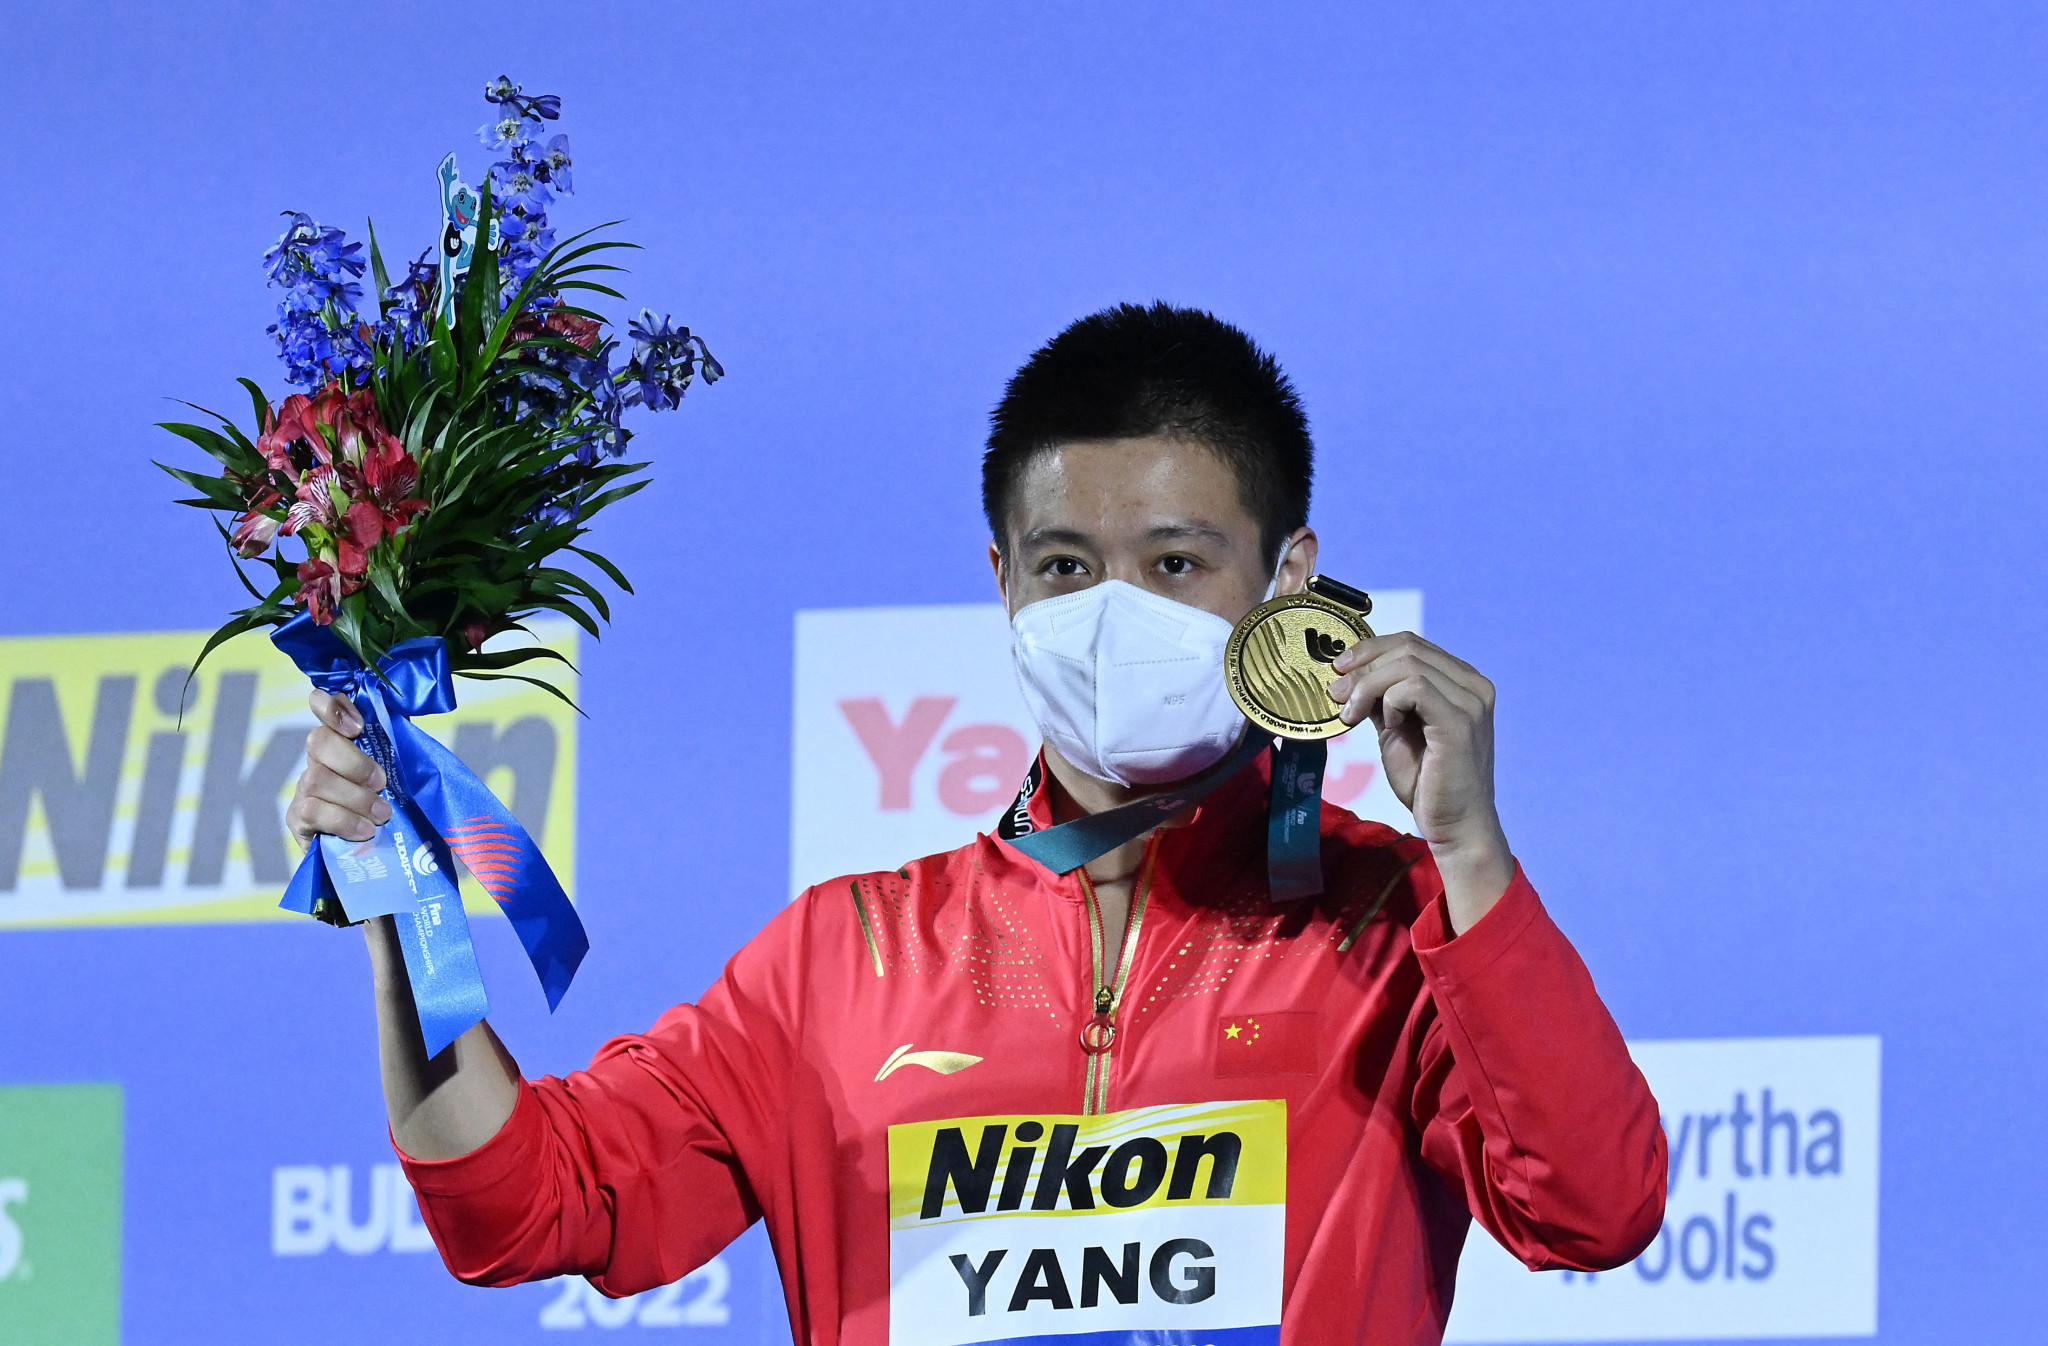 Yang Jian won China's 13th diving gold medal of the FINA World Championships in the men's 10m platform ©Getty Images